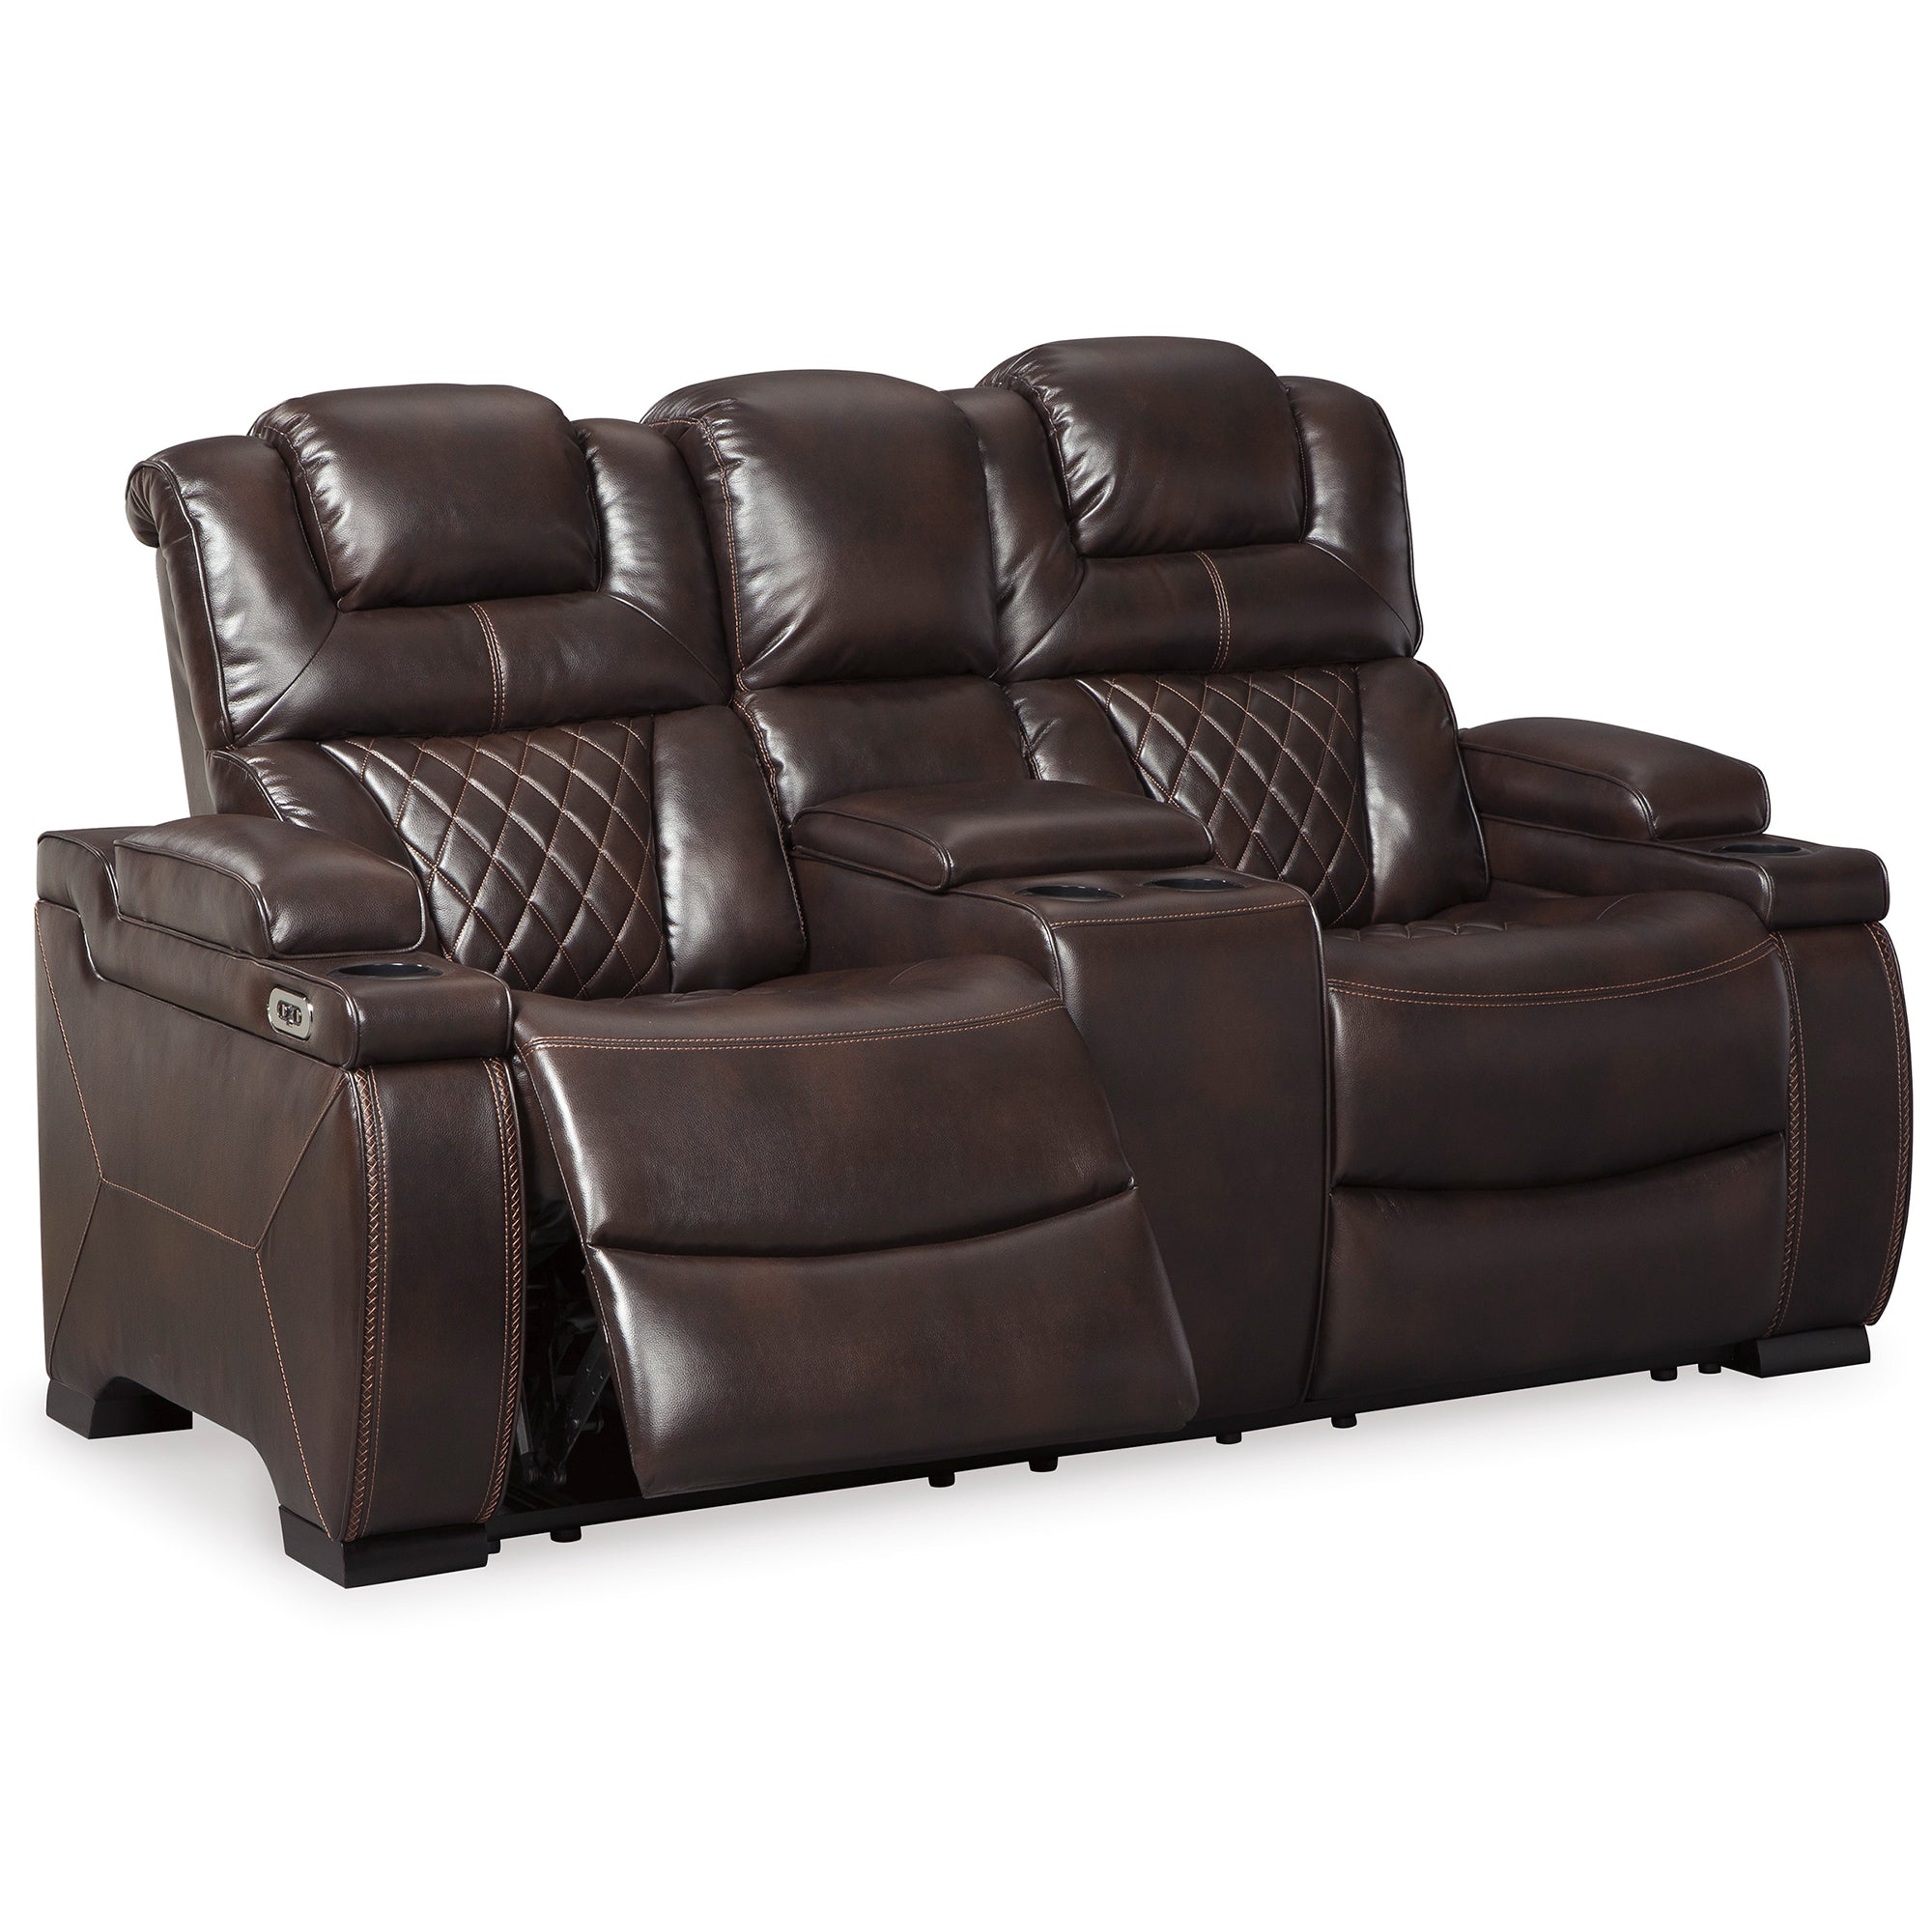 Warnerton Dual Power Reclining Loveseat with Console